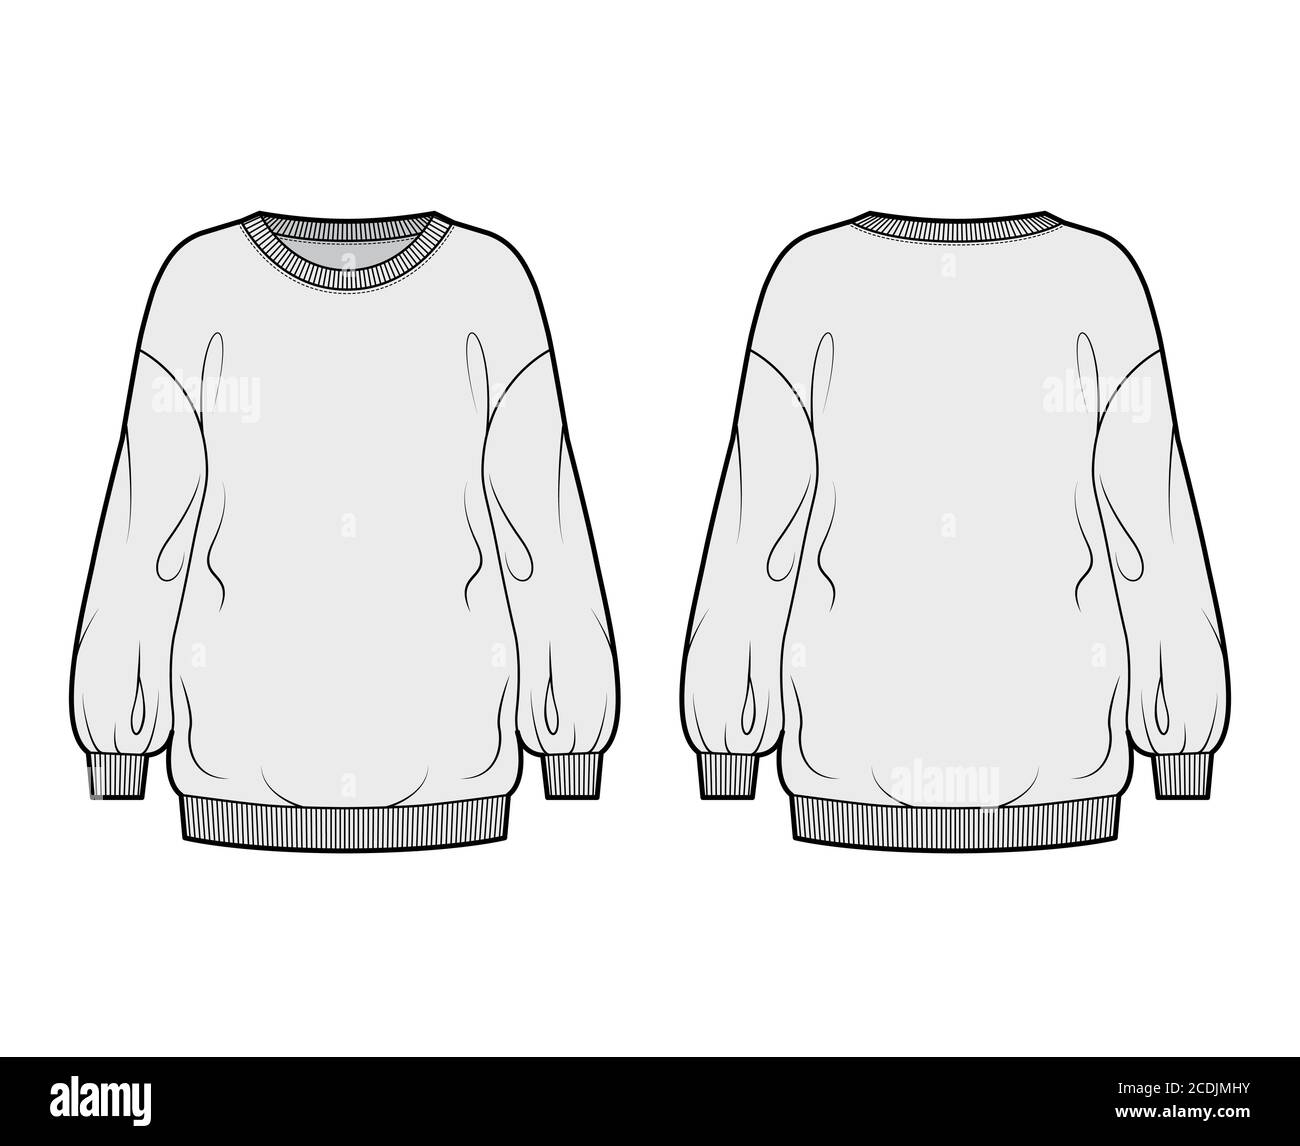 Cotton-terry slouchy oversized sweatshirt technical fashion illustration with loose relaxed fit, crew neckline, long sleeves. Flat jumper apparel template front, back, grey color. Women, men top CAD Stock Vector